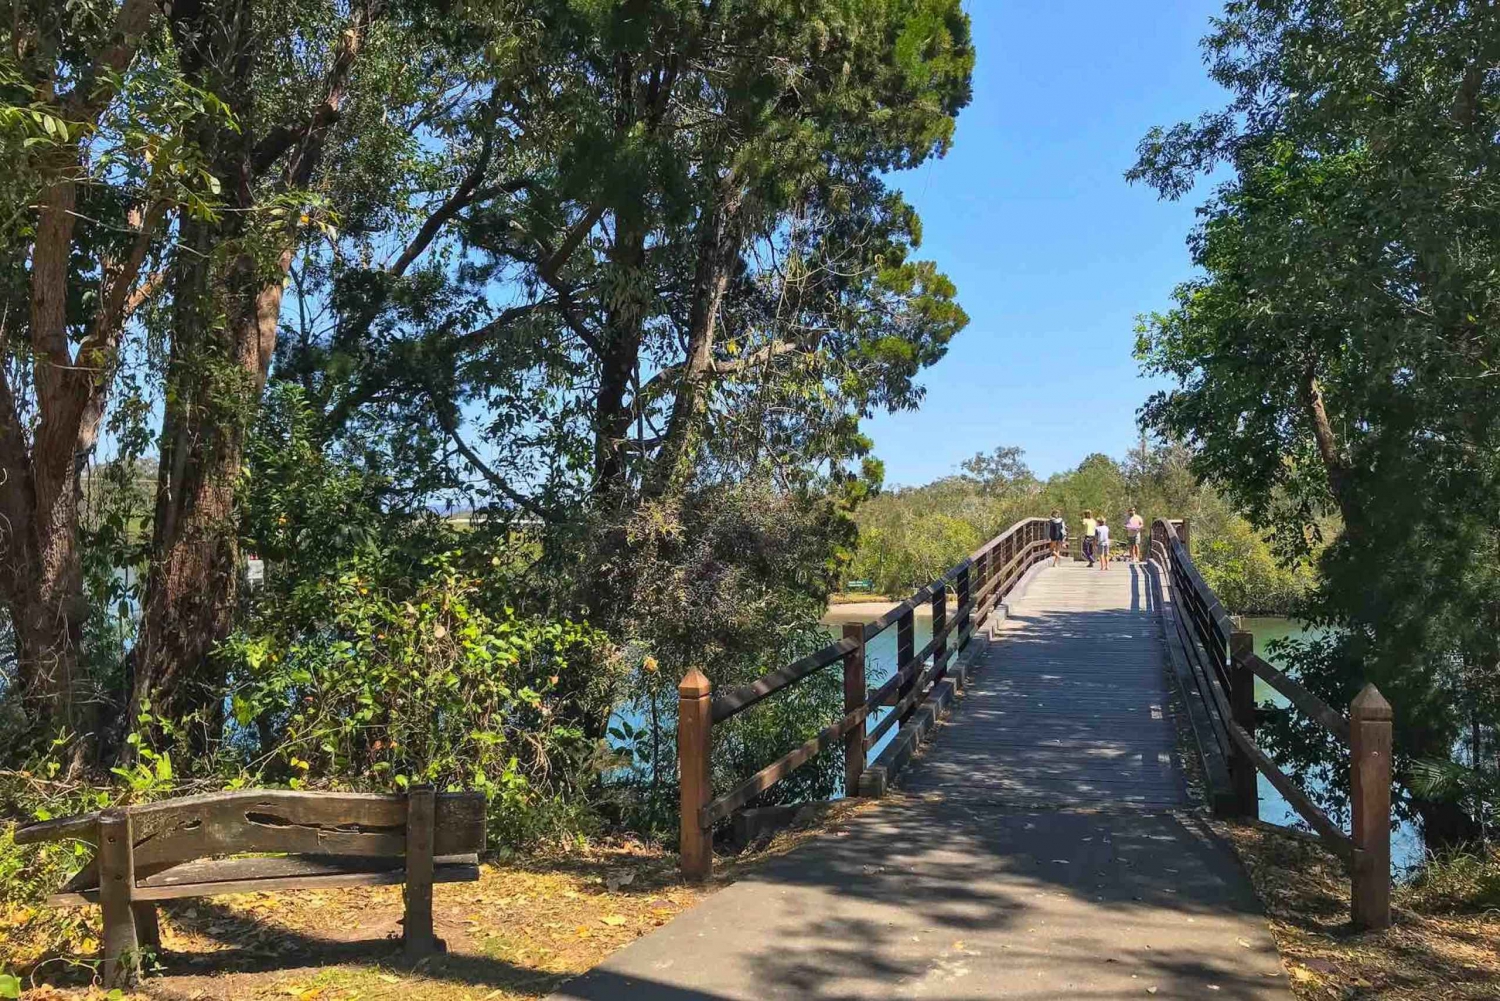 Noosa: Secrets of Noosa Tour with Lunch Nature & River Ferry